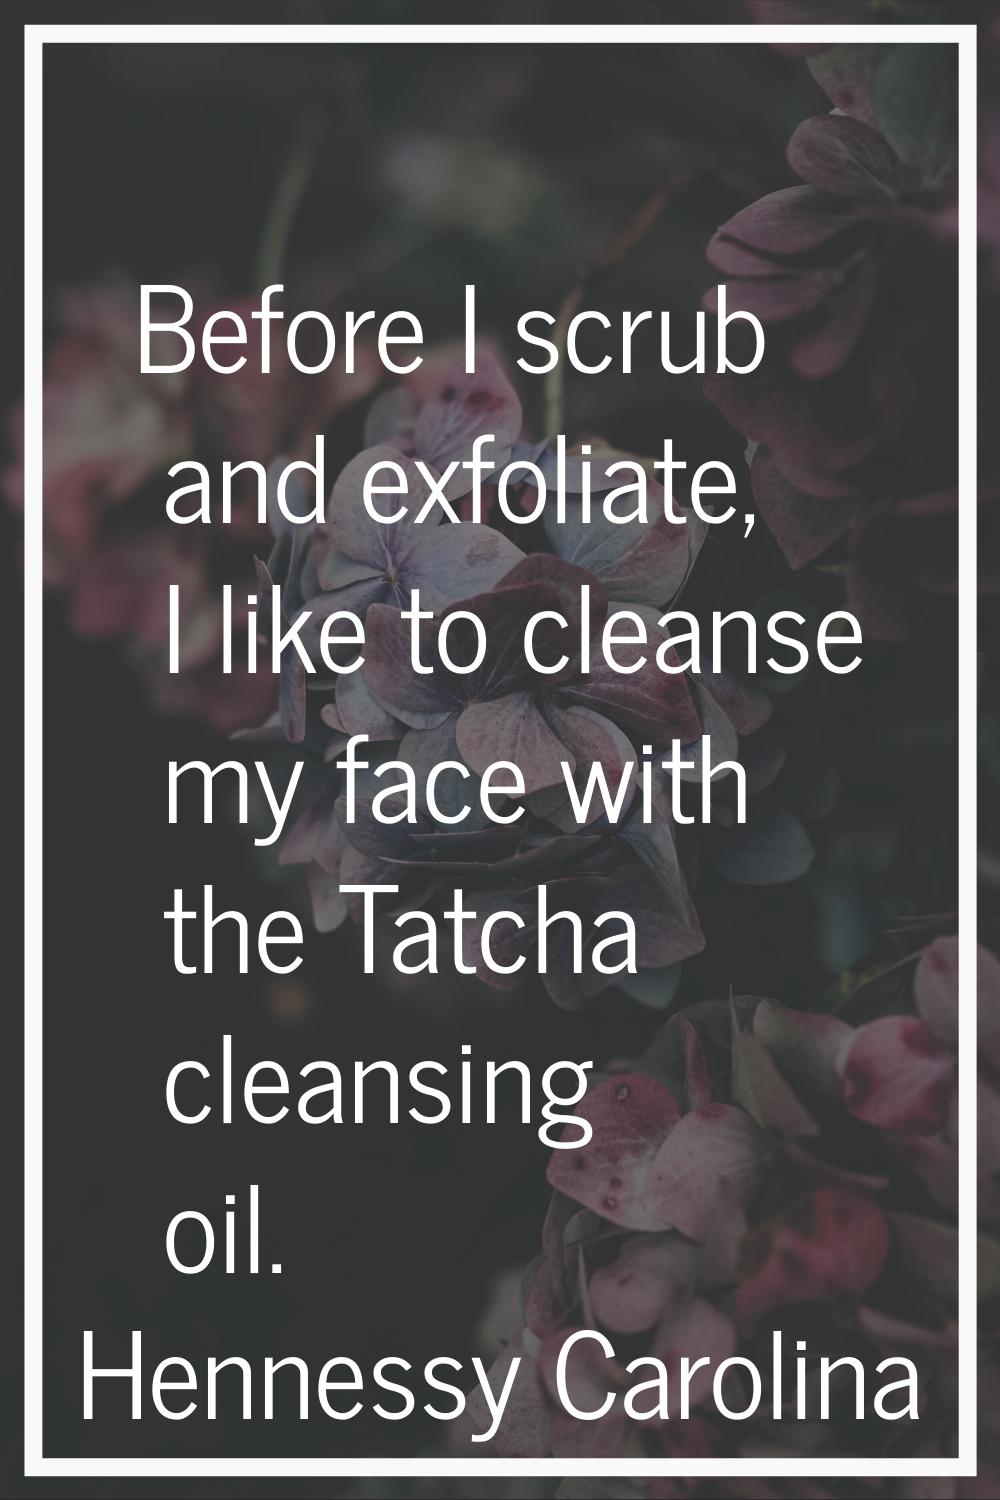 Before I scrub and exfoliate, I like to cleanse my face with the Tatcha cleansing oil.